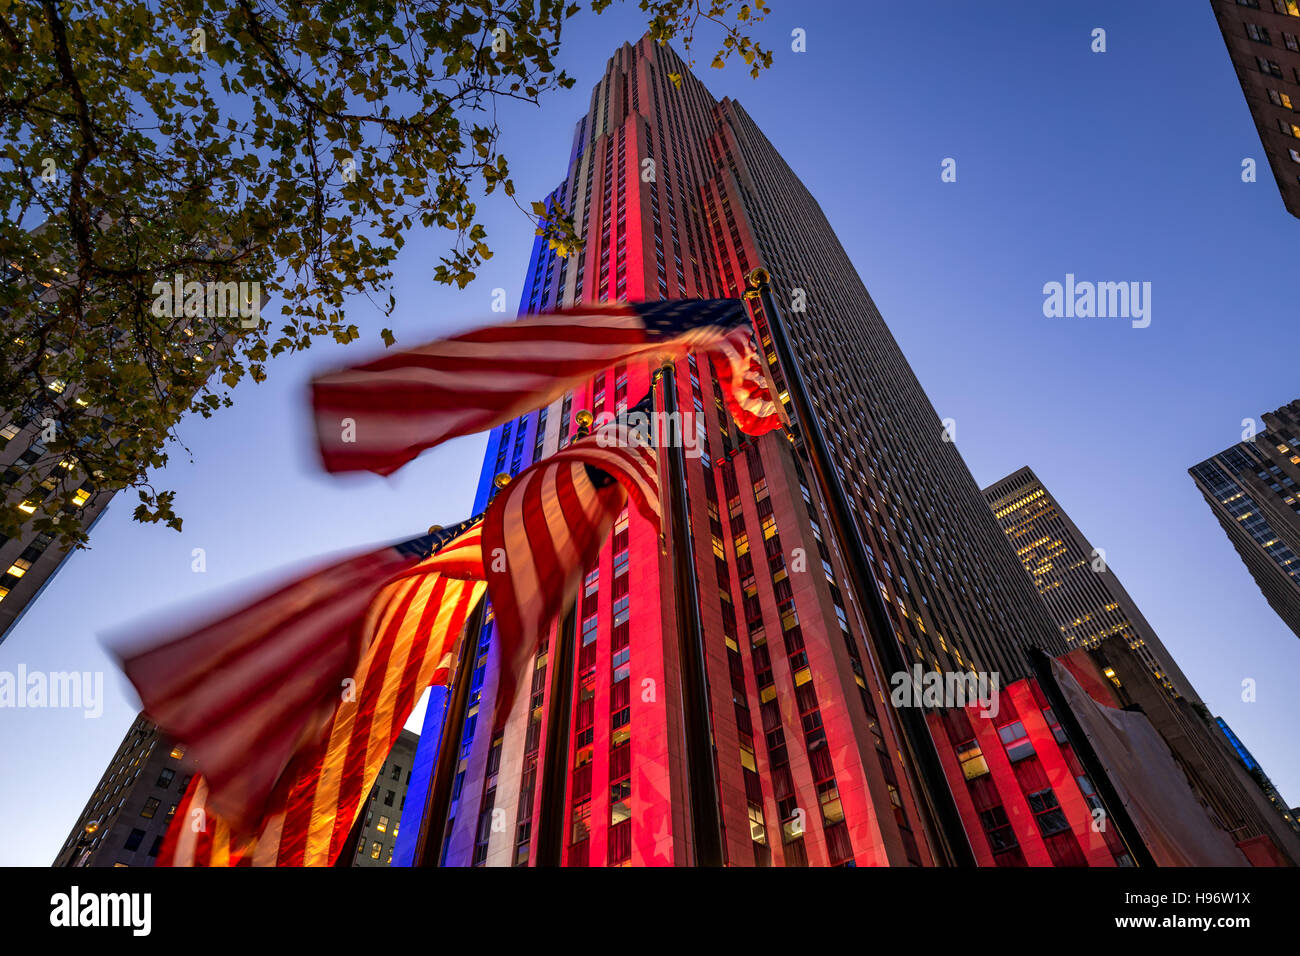 Rockefeller Center at twilight illuminated in white, red and blue. American flags flap in the wind. Midtown Manhattan, New York Stock Photo